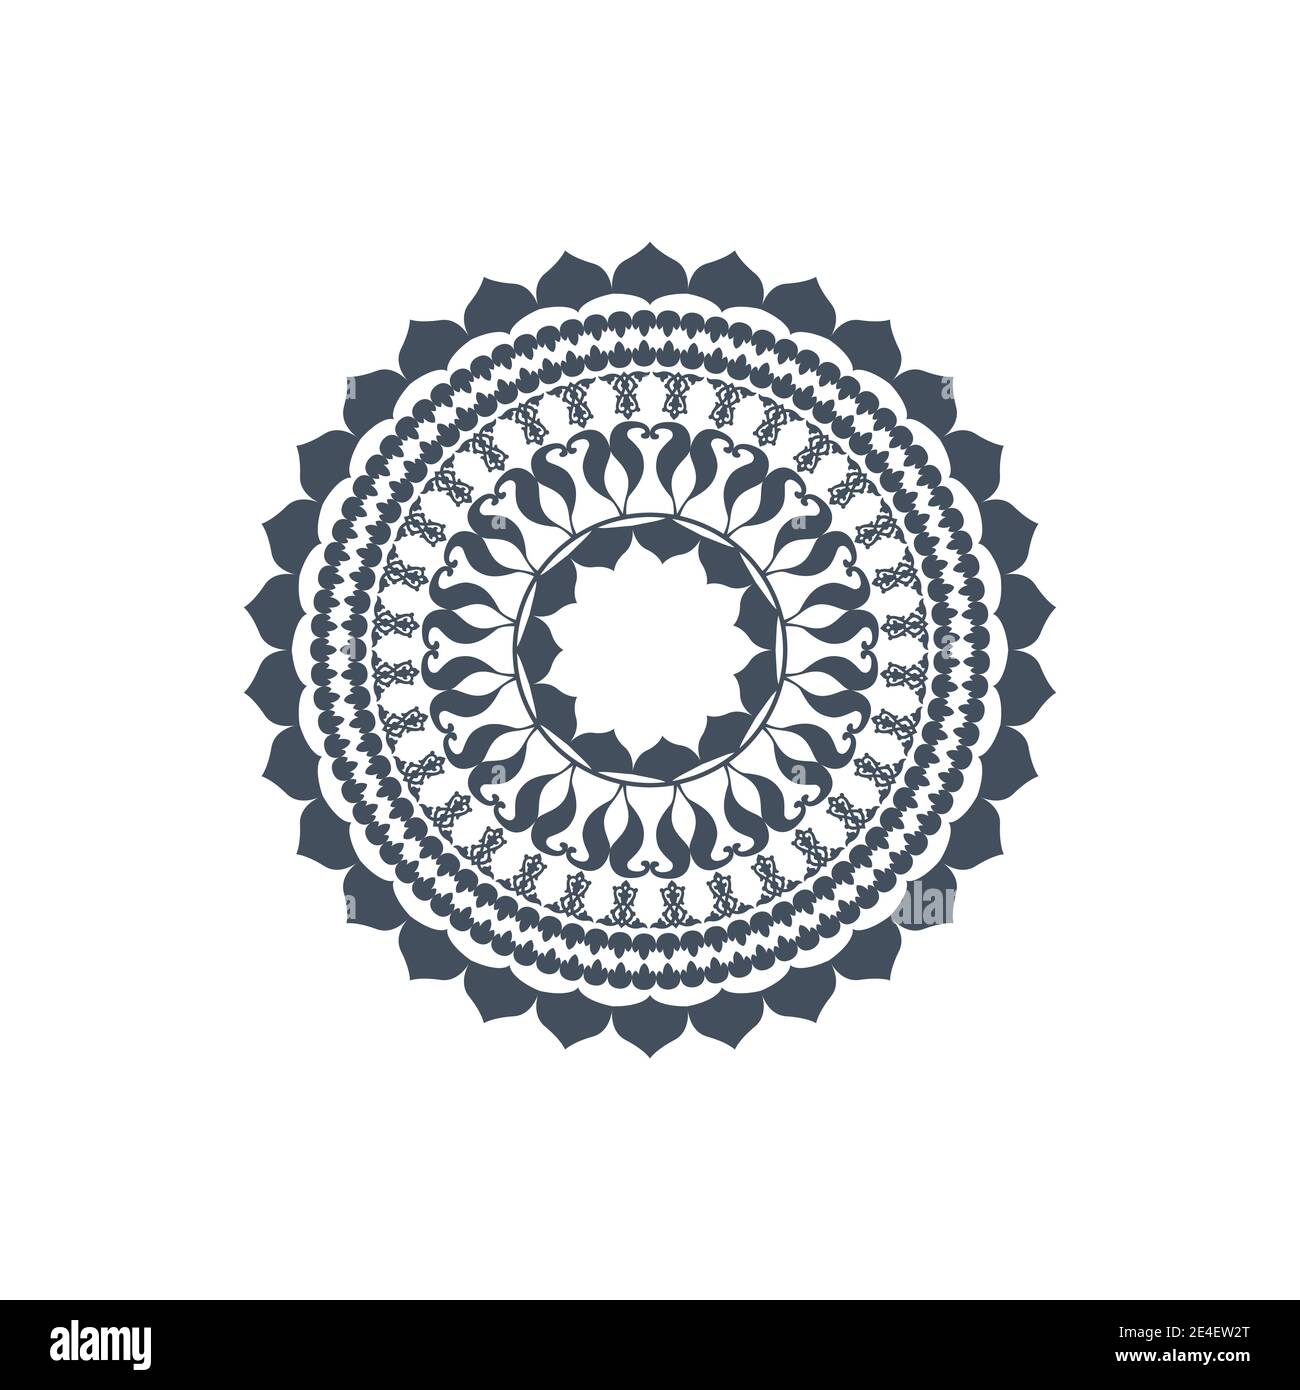 Circular pattern in form of mandala for Henna, Mehndi, tattoo, decoration. Decorative ornament in ethnic oriental style. Coloring book page. Stock Vector